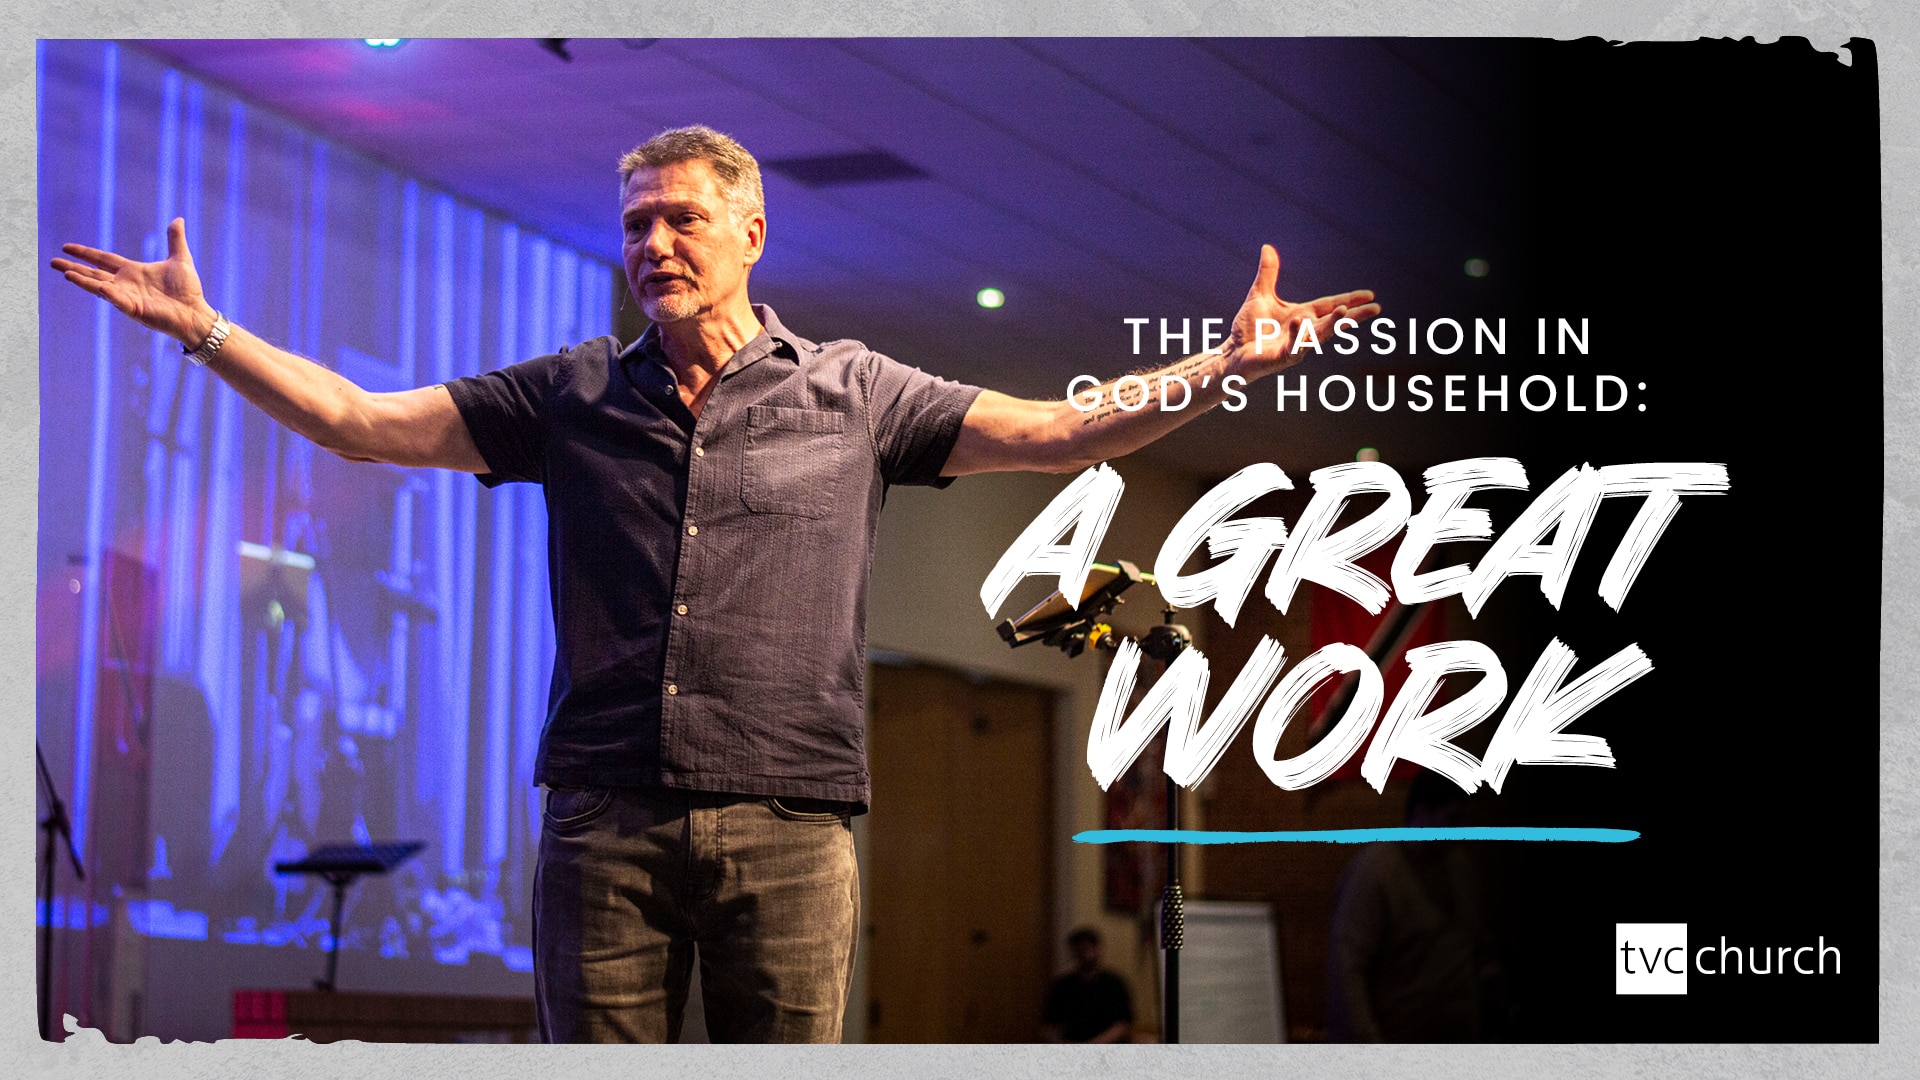 The Passion in God’s Household: A Great Work